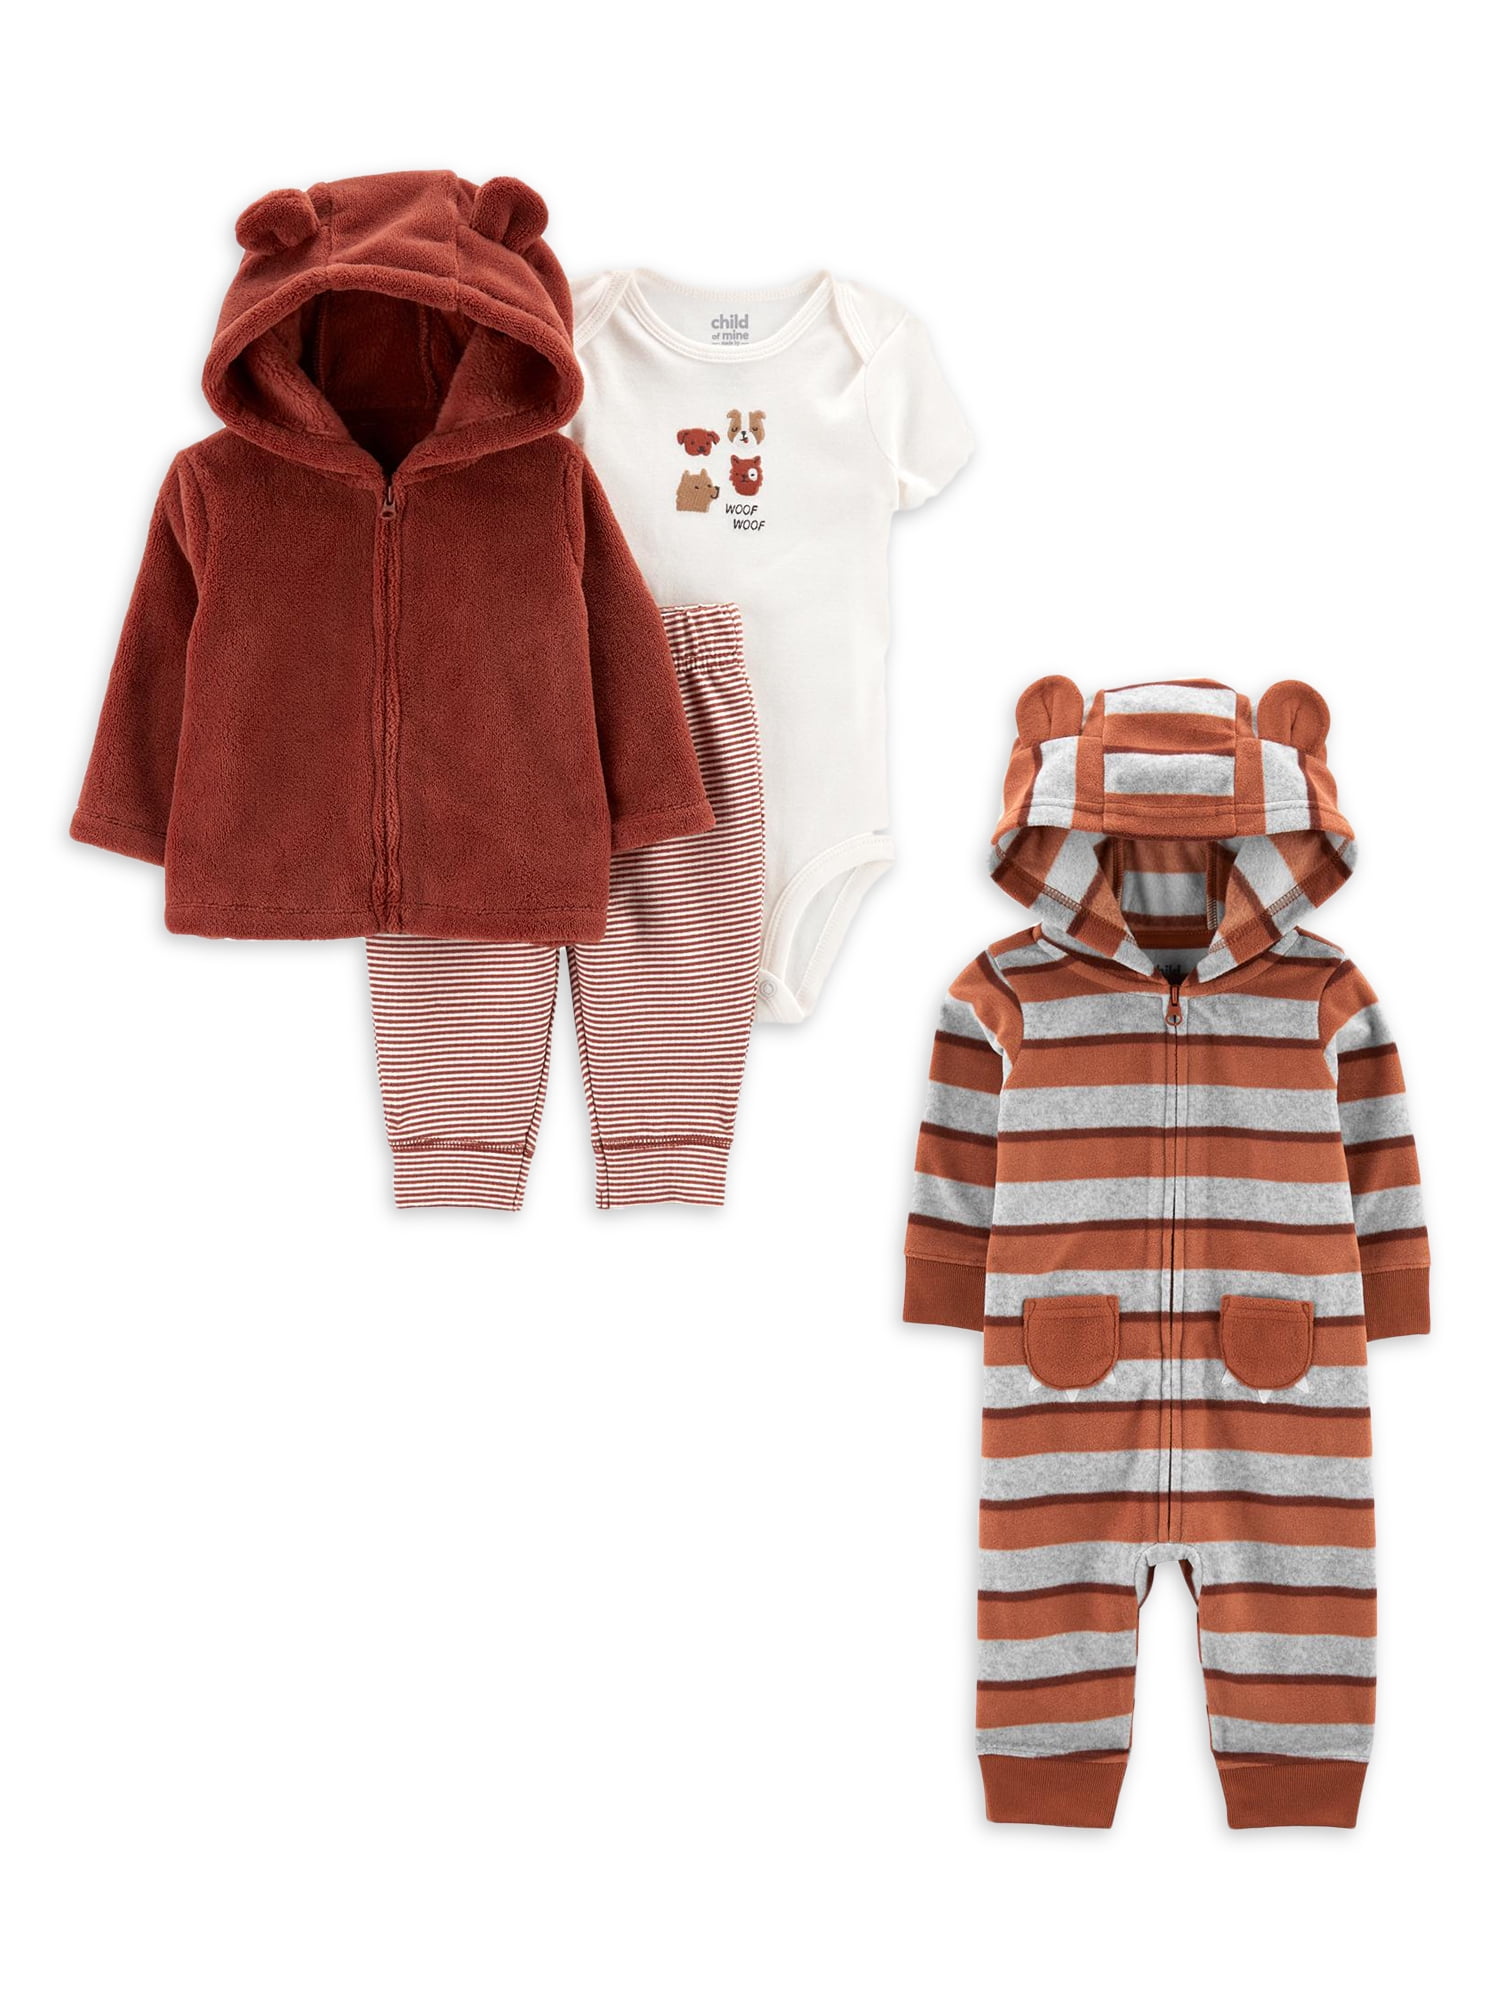 Carter's Child of Mine Baby Boy Cardigan Outfit and Jumpsuit Set, 4-Piece,  Sizes 0-24M 